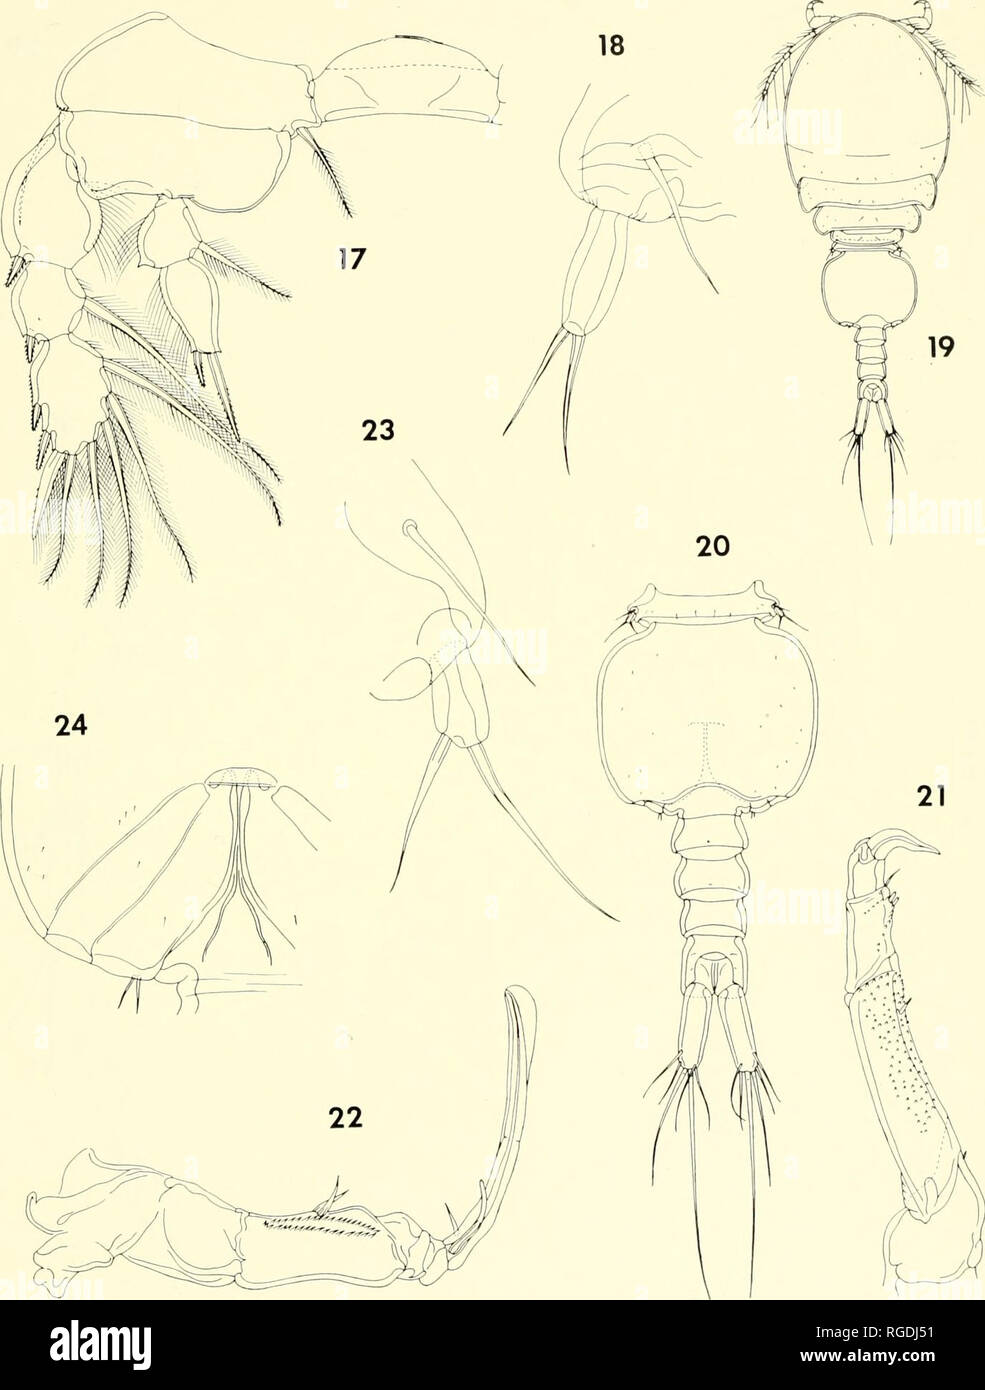 . Bulletin of the Museum of Comparative Zoology at Harvard College. Zoology. COPEPODS FROM CORALS IN MADAGASCAR • HlimeS (llld Ho 385. Figures 17-18. Lichomolgus campulus n. sp., female (continued). 17, leg 4 and intercoxal plate, anterior (D); 18, leg 5, dorsal (F). Figures 19-24. i.ichomo/gus campulus n. sp., male. 19, body, dorsal (A); 20, urosome, dorsal (B); 21, second antenna, outer (E); 22, maxilliped, inner (E); 23, leg 5, posterodorsal (G); 24, leg 6, ventral (E).. Please note that these images are extracted from scanned page images that may have been digitally enhanced for readabilit Stock Photo